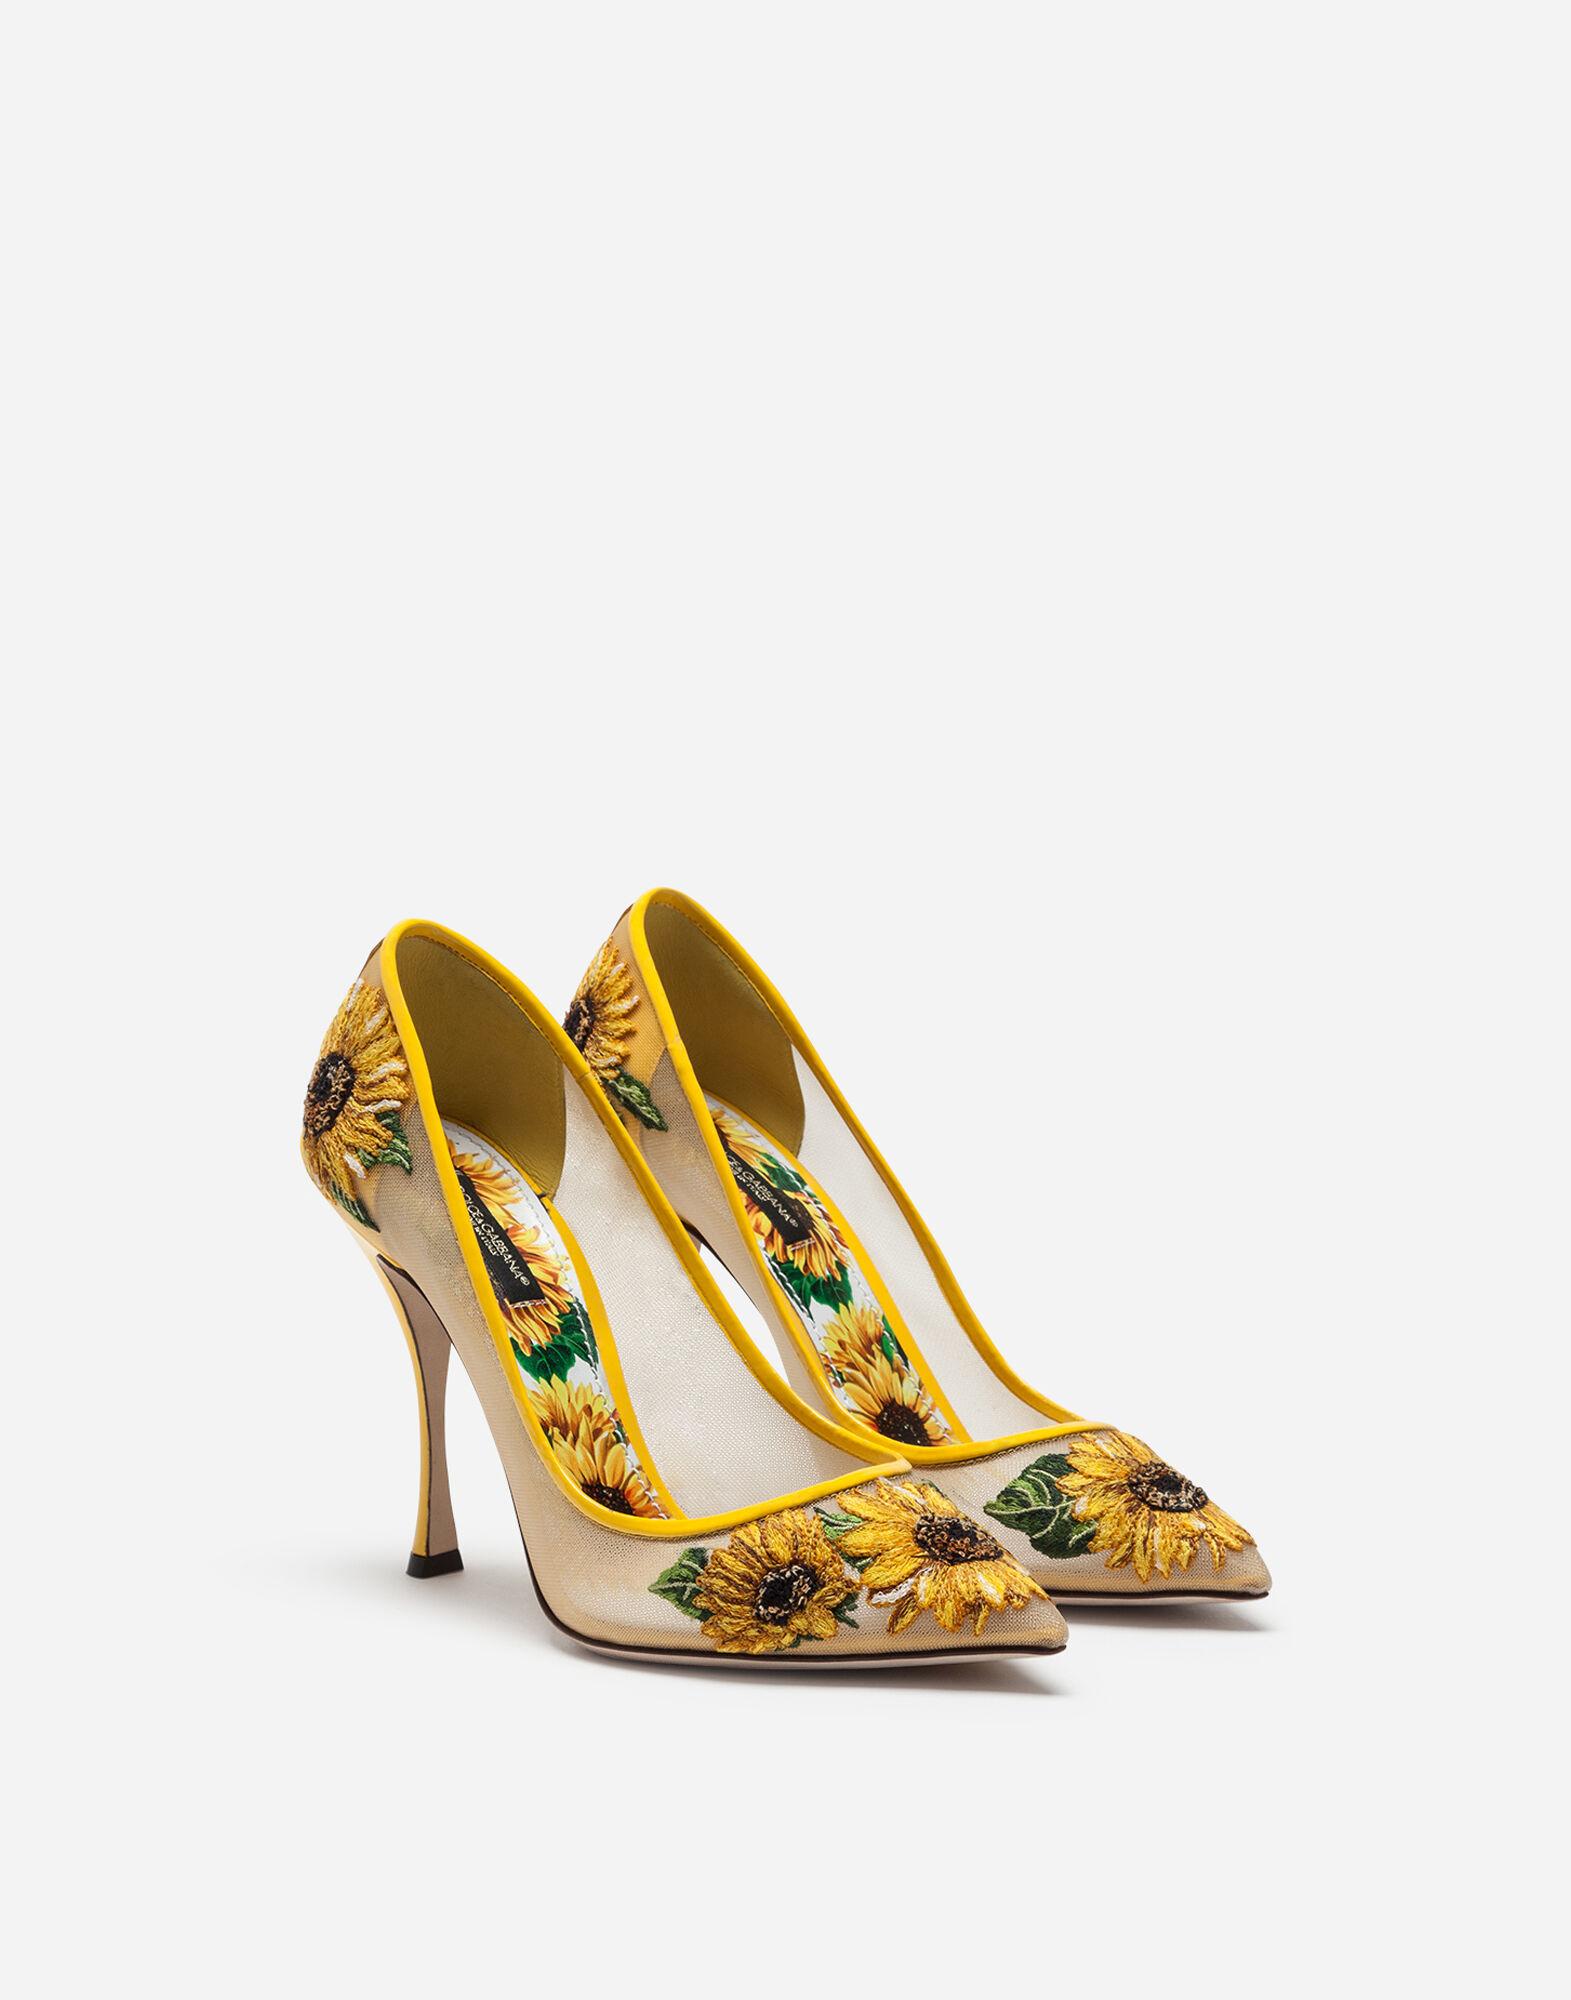 Dolce & Gabbana Tweed Mesh Pumps With Sunflower Embroidery in Floral ...